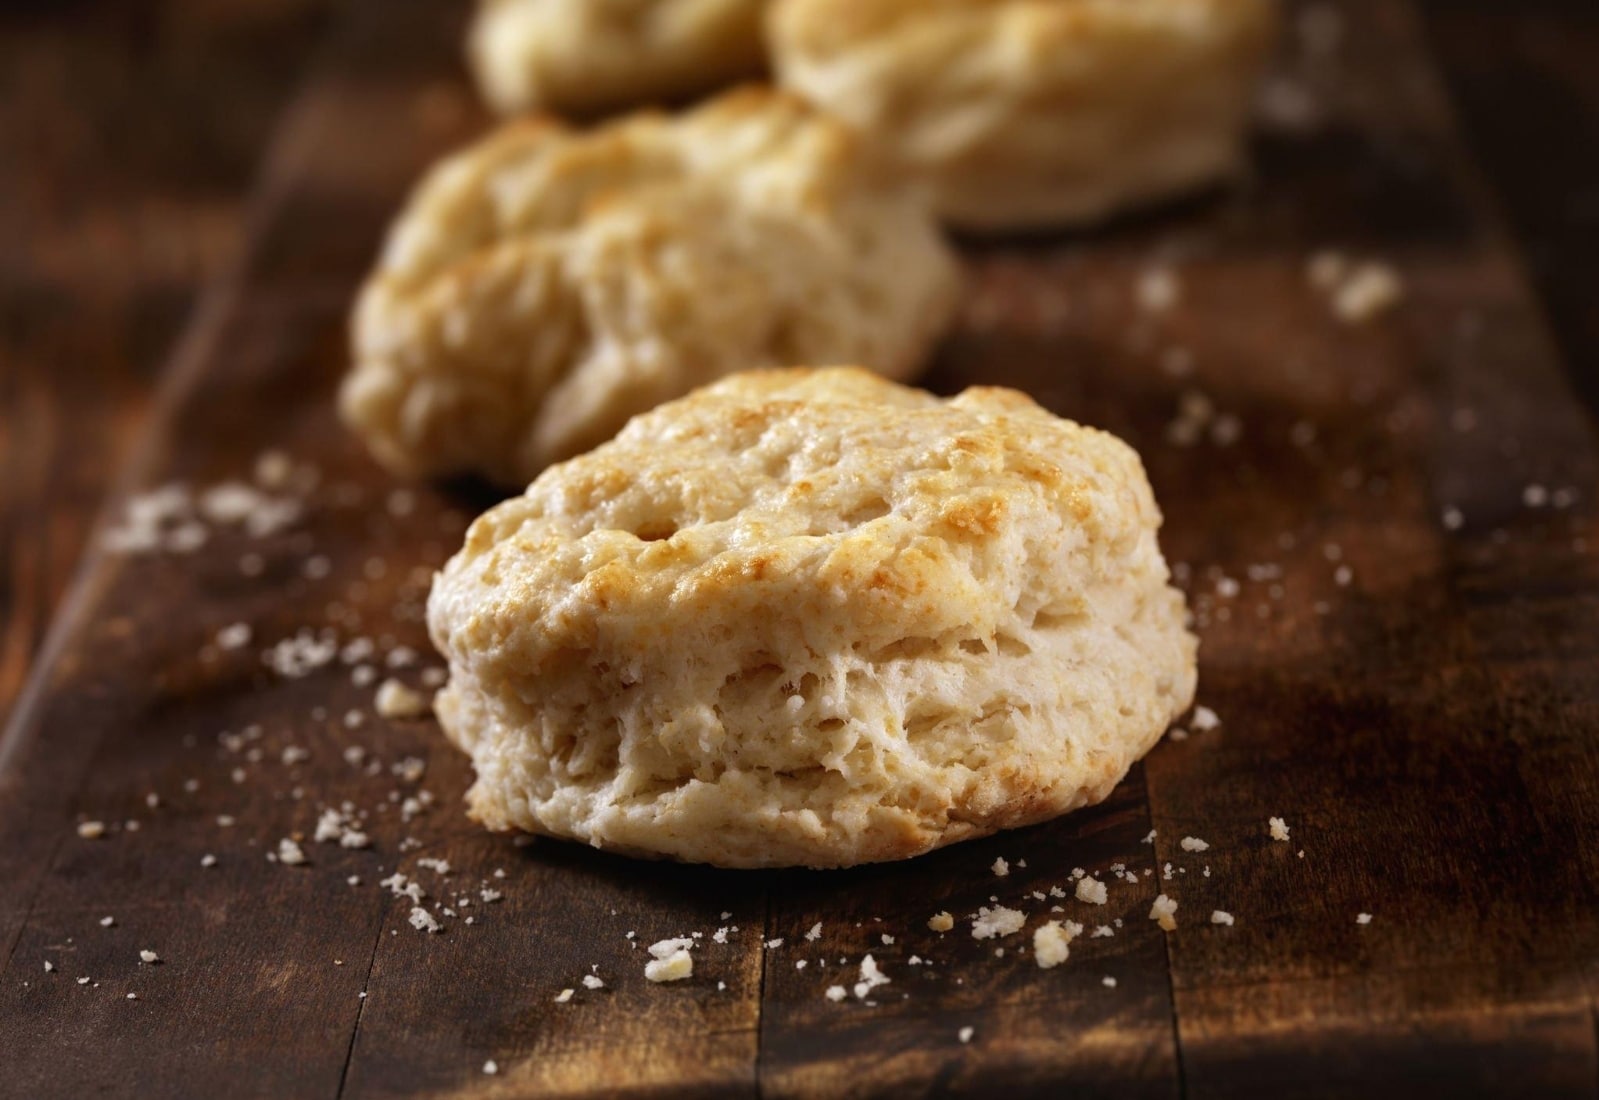 How do you keep biscuits from sticking in an air fryer?